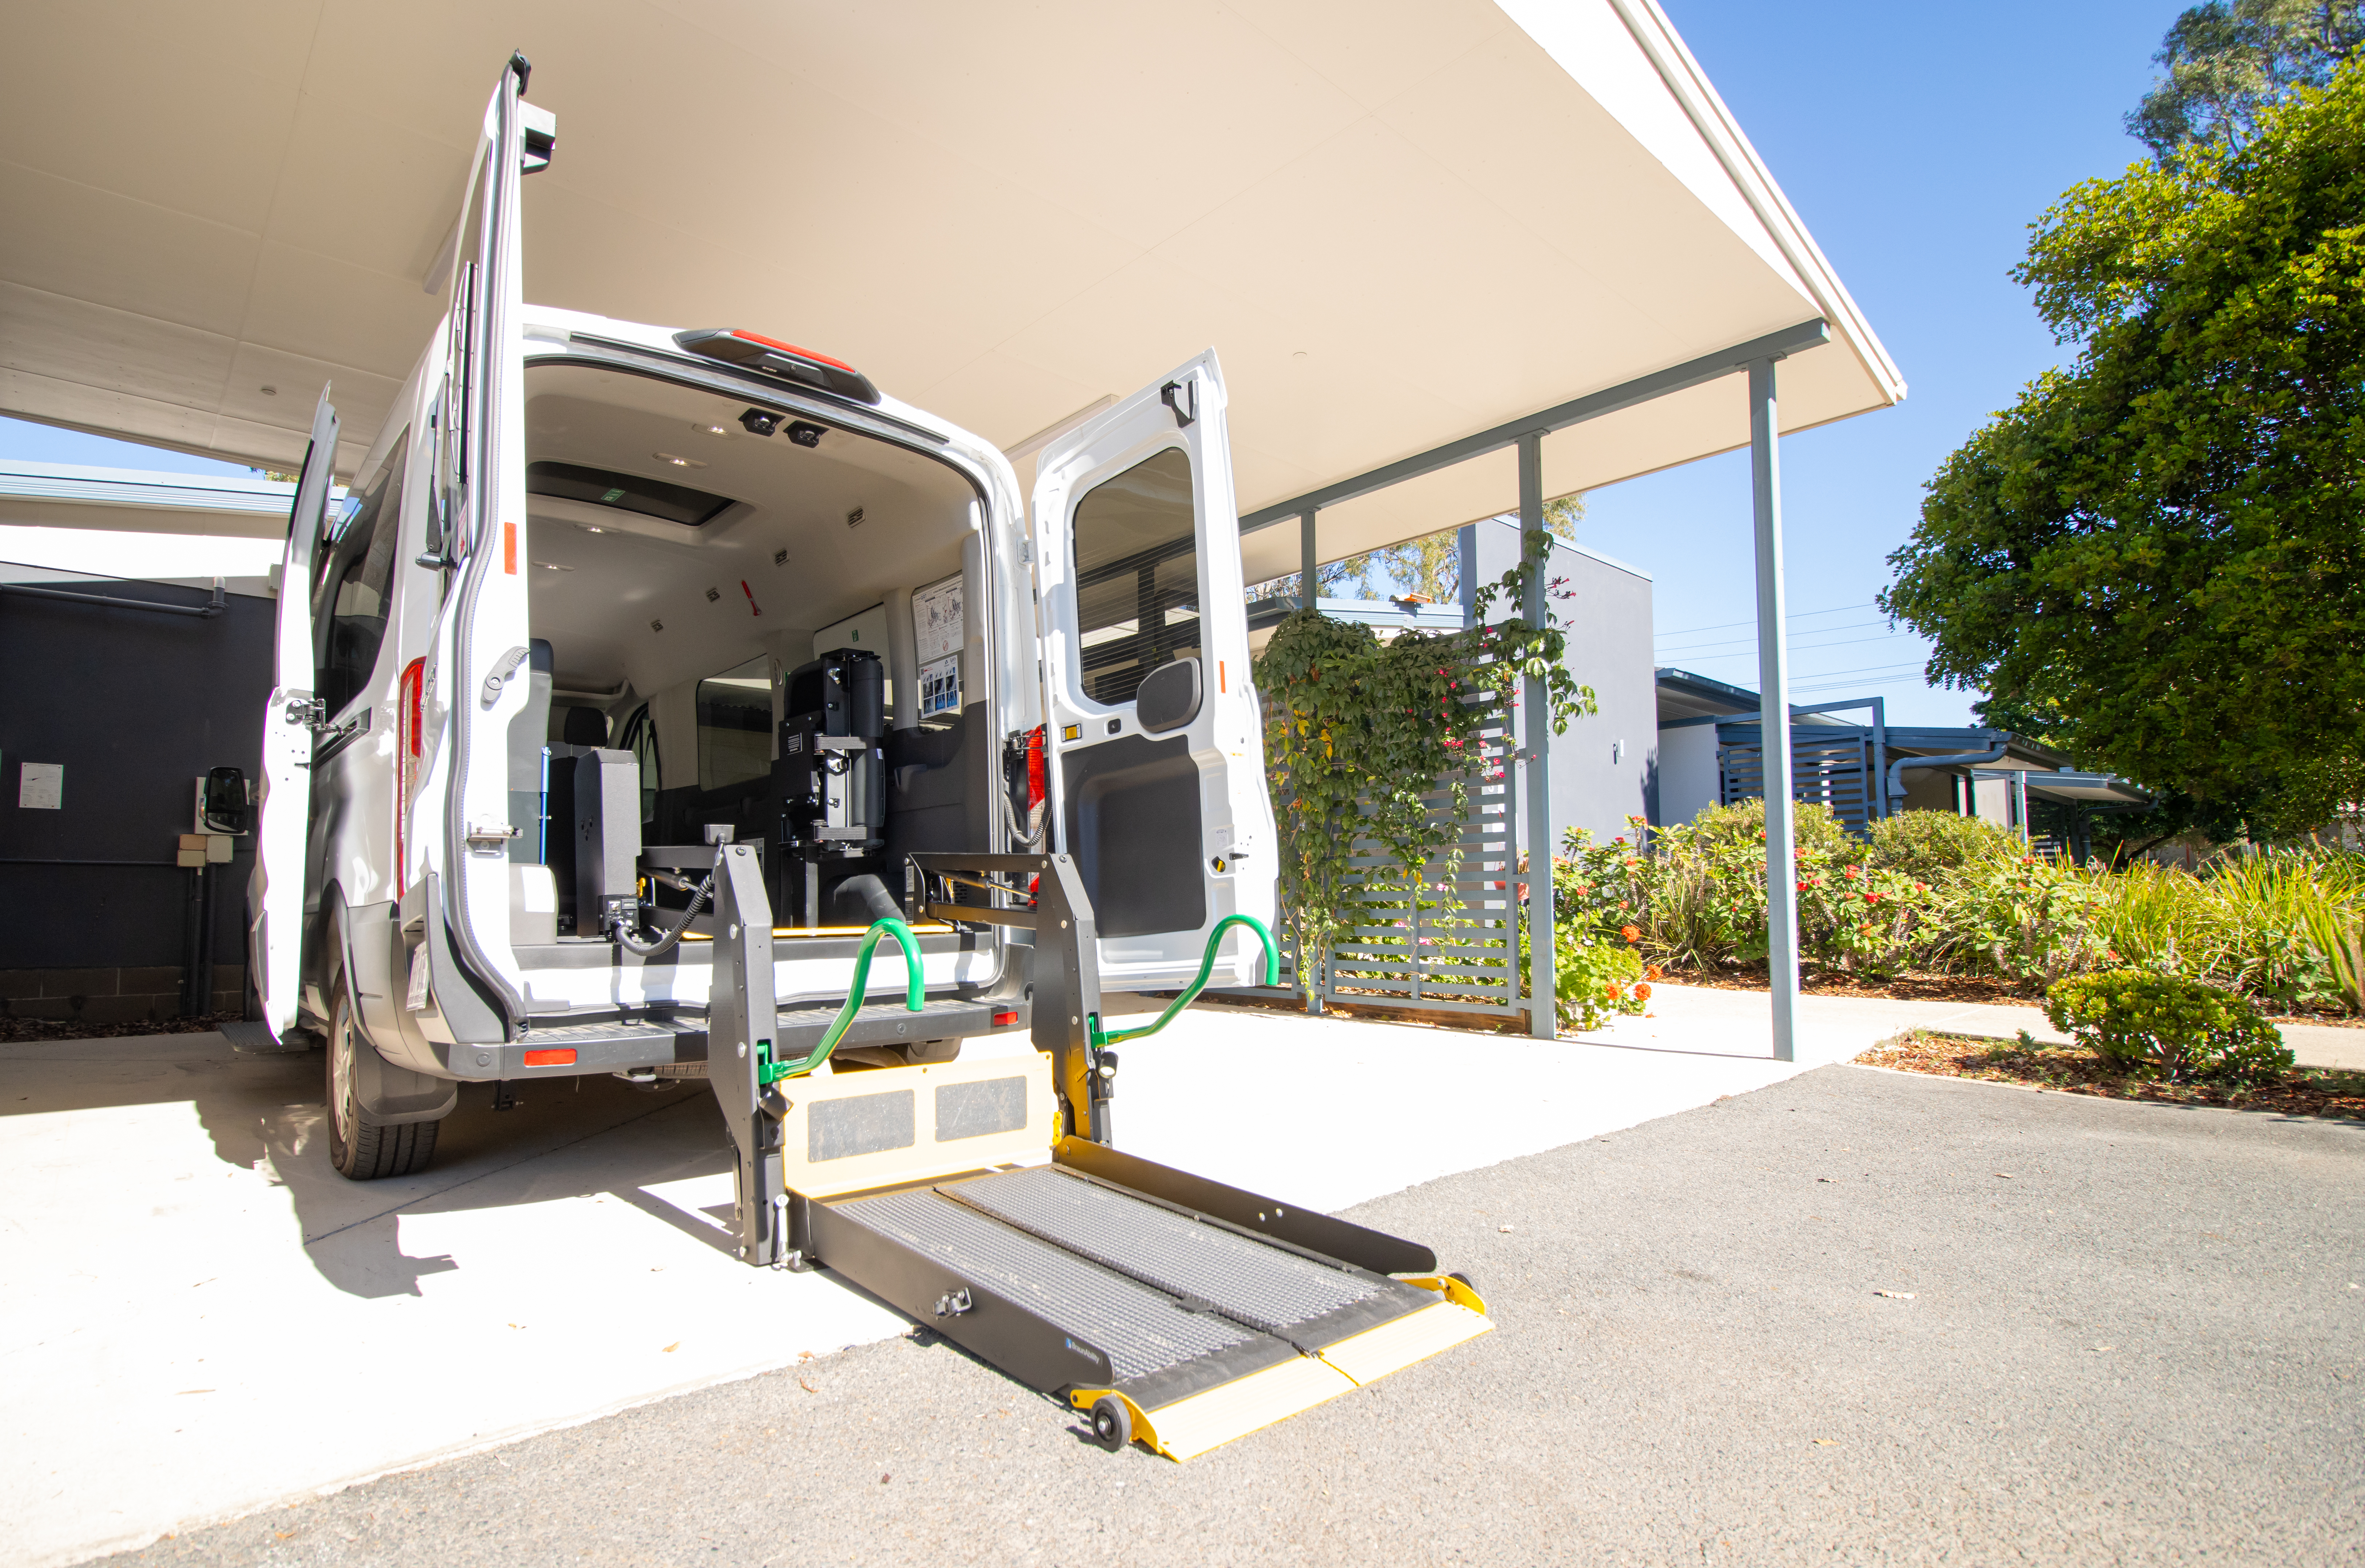 A wheelchair accessible car with its lift down under the carport